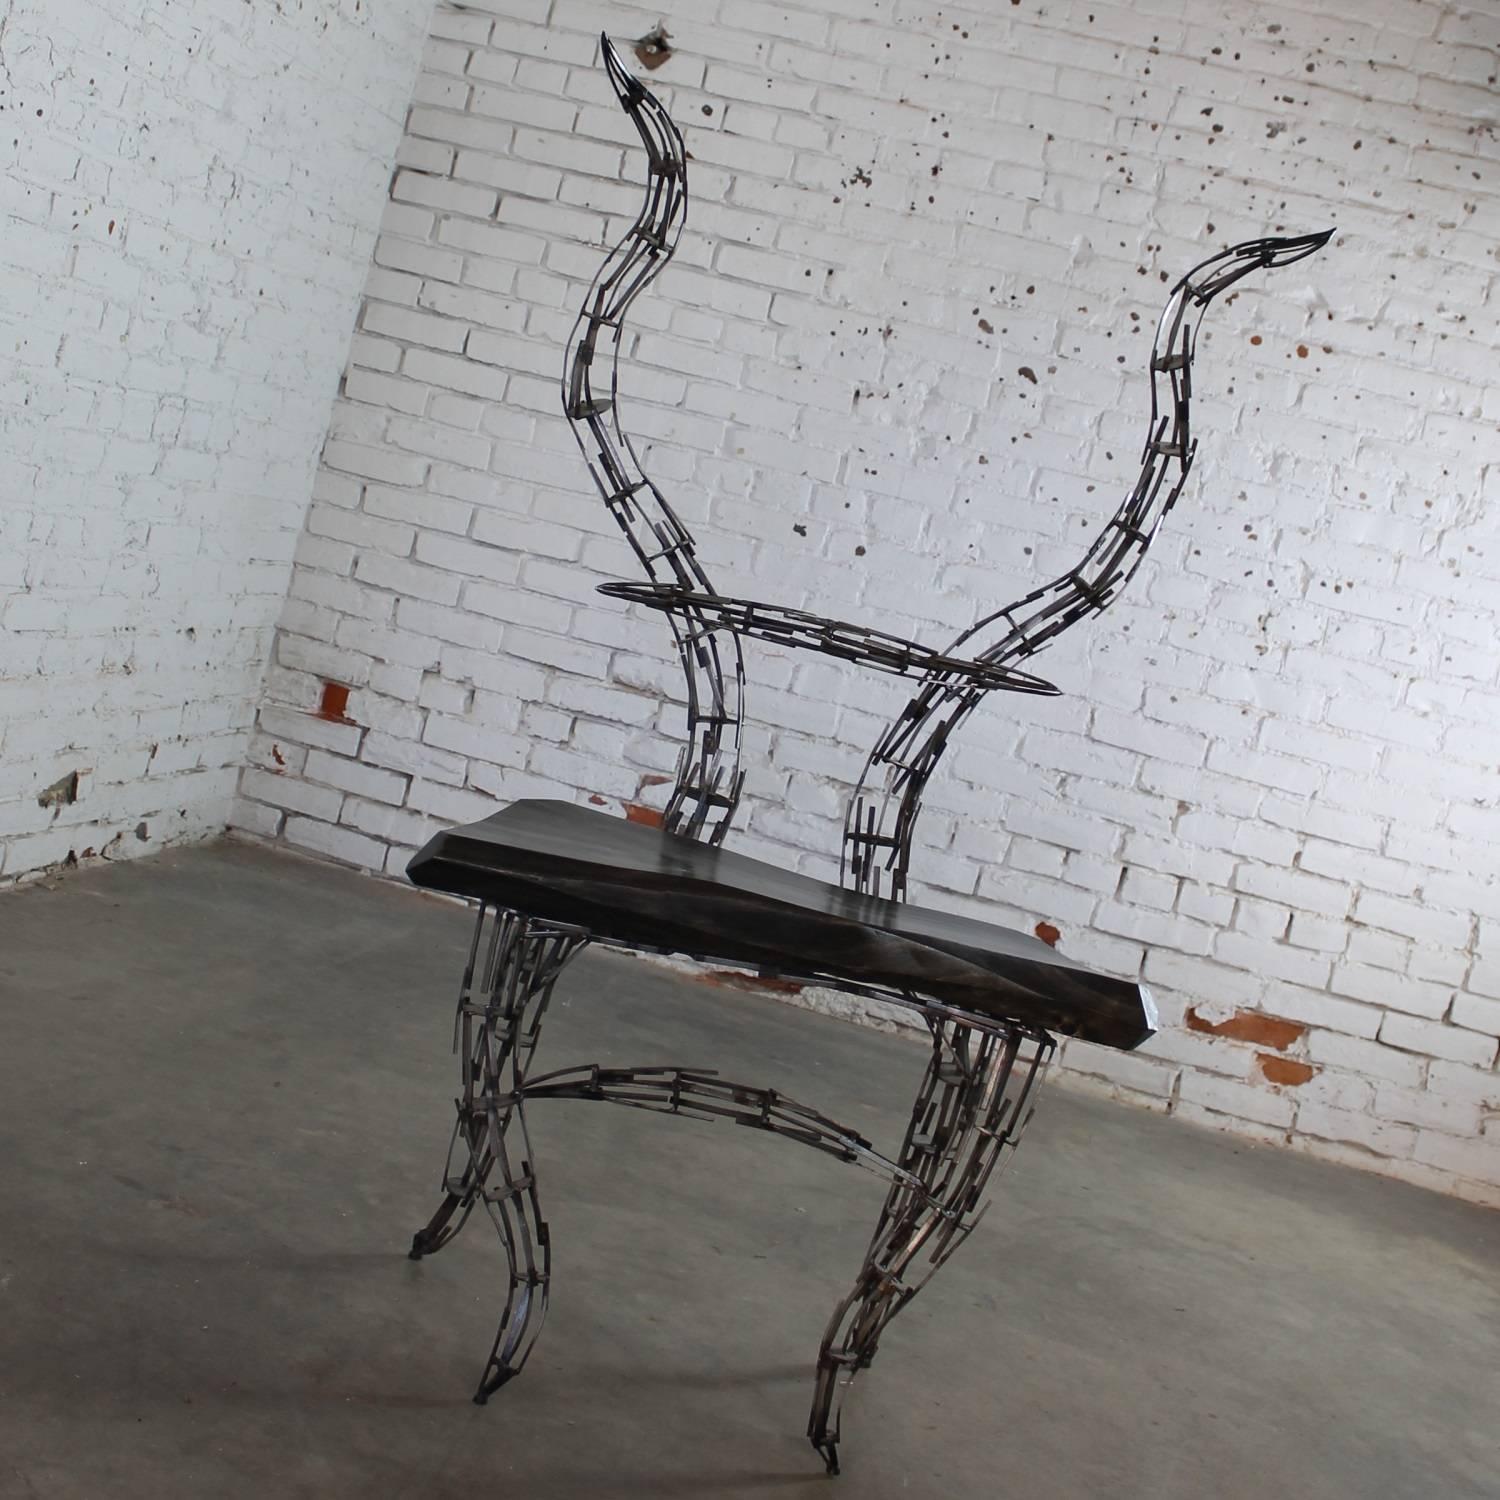 One of a kind sculptural chair of reclaimed scrap metal and wood titled “Borgantula” by Jason Startup. Wonderful Horn chair sculpture in new condition, circa 2017.

Not your mother’s side chair! This outstanding chair sculpture comes from the